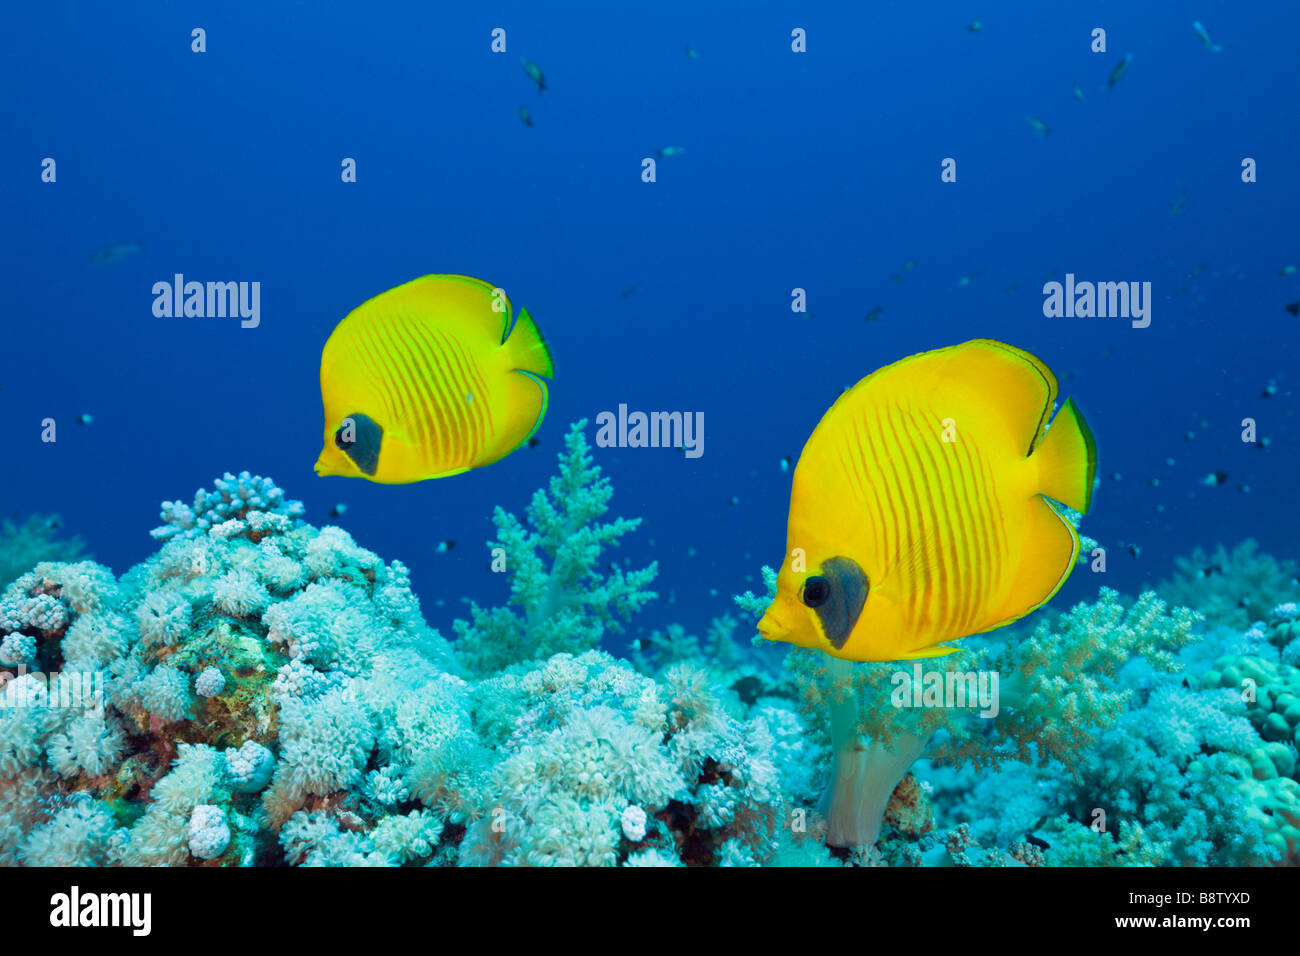 Pair of Masked Butterflyfish Chaetodon semilarvatus St Johns Reef Rotes Meer Egypt Stock Photo